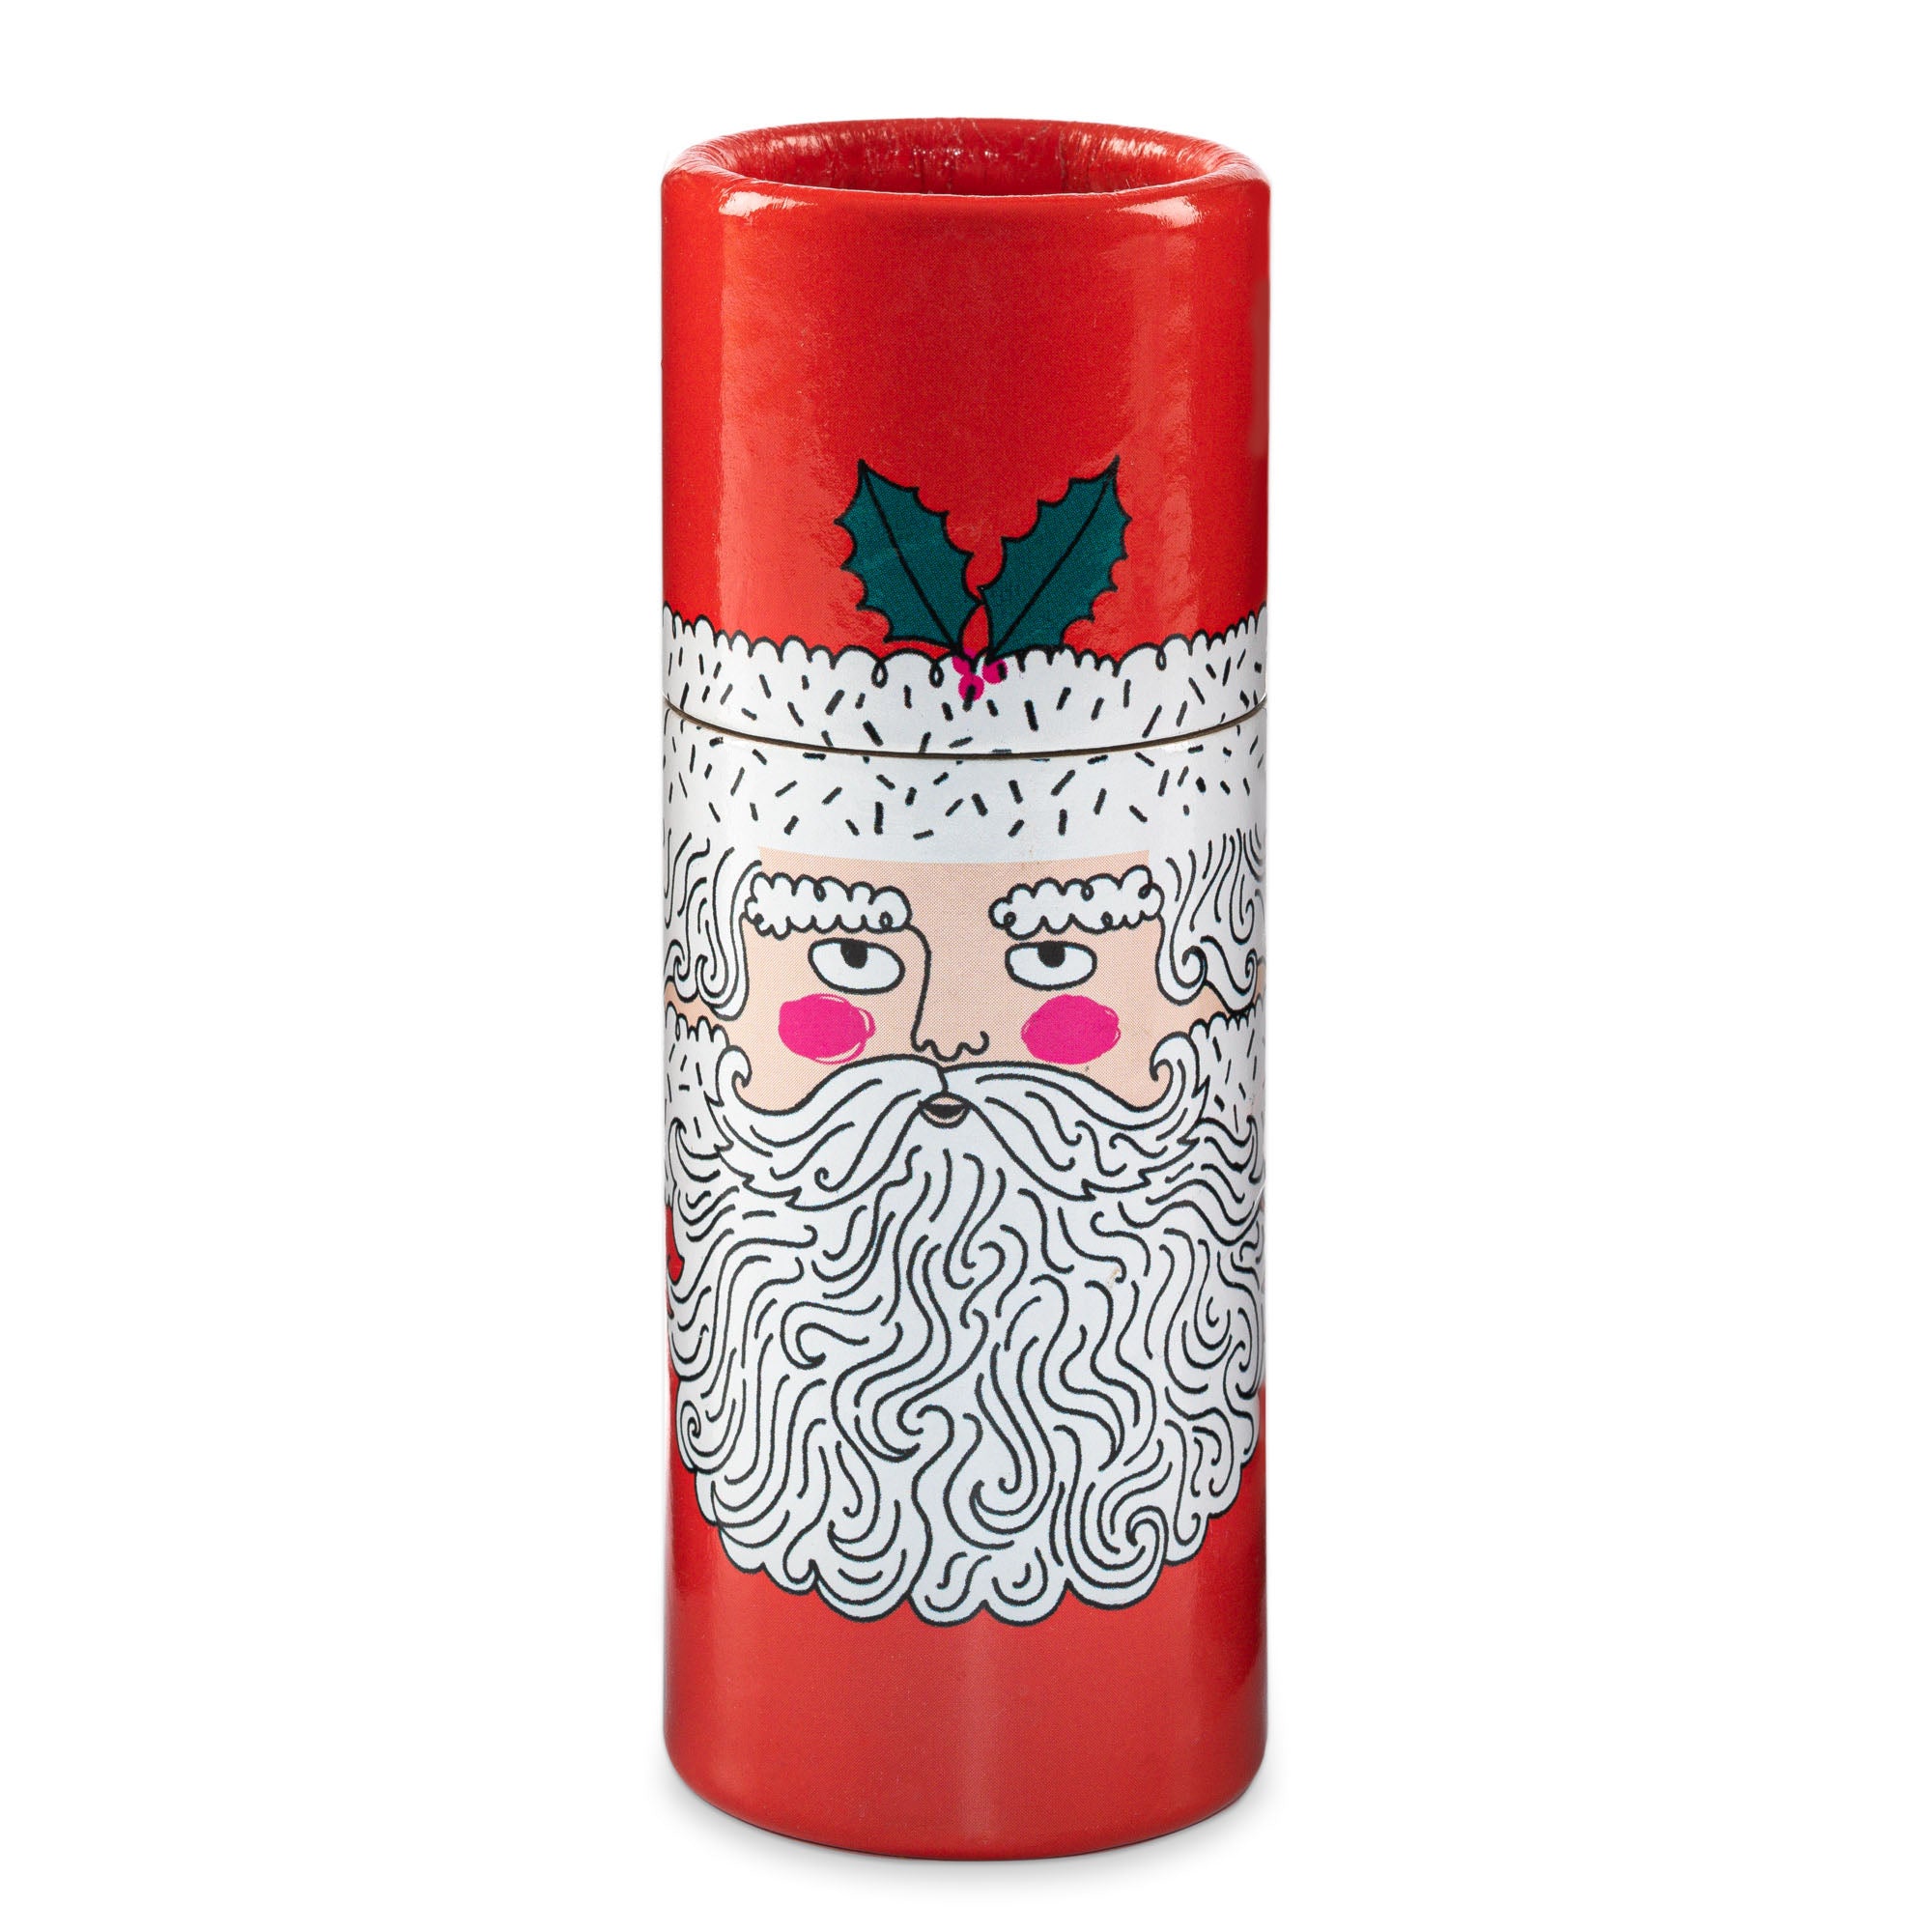 Archivist - Father Christmas Cylinder Matches